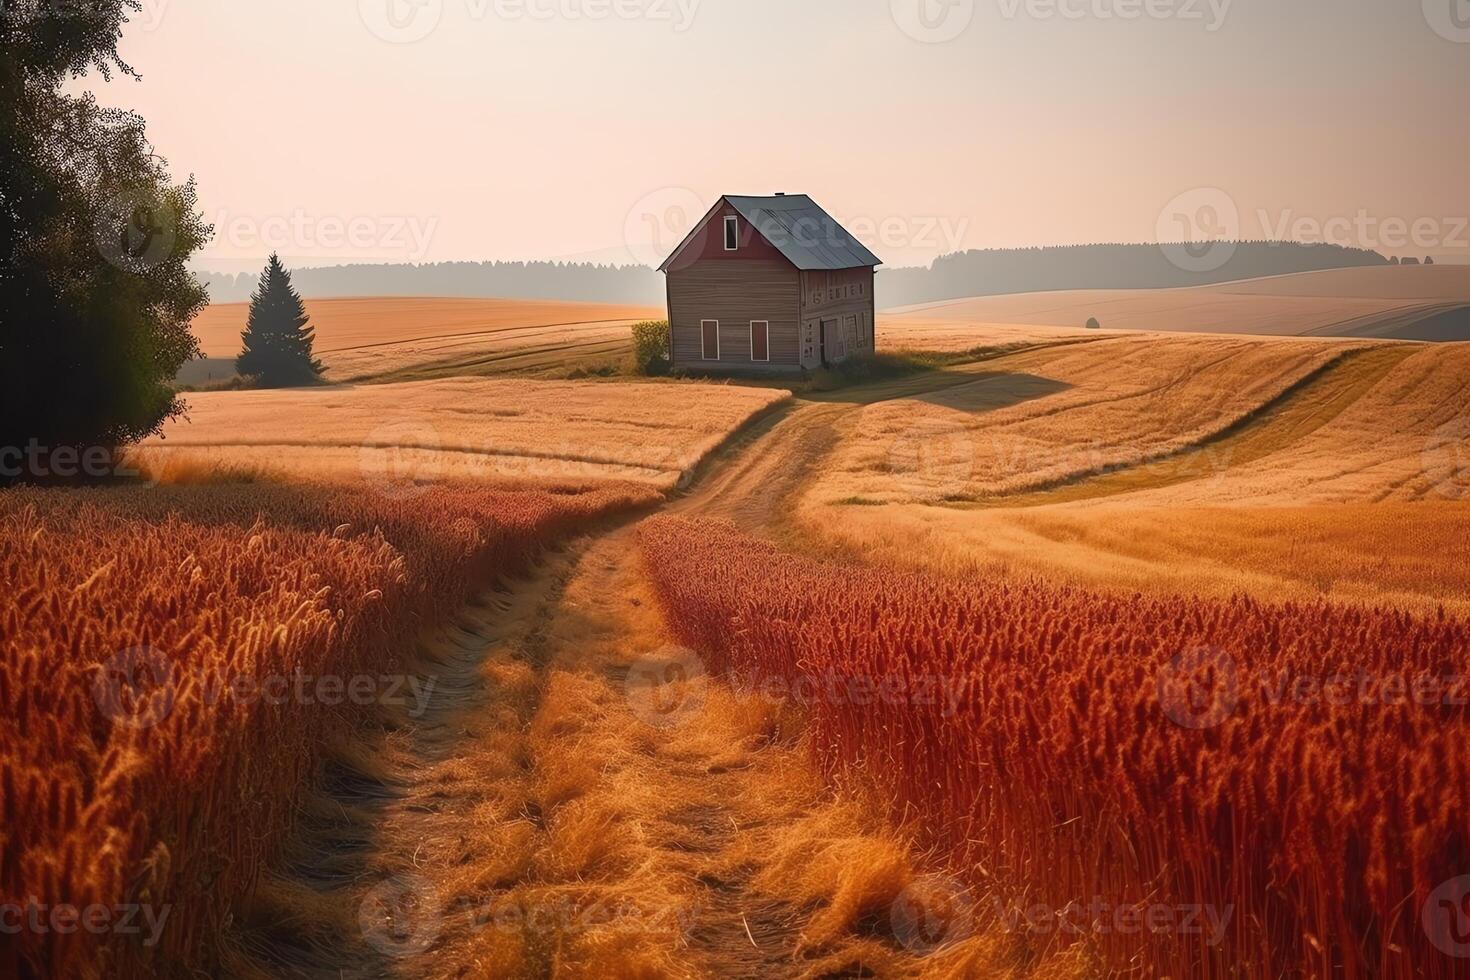 Beautiful landscape scene of a farm red barn next to fields of wheat. photo